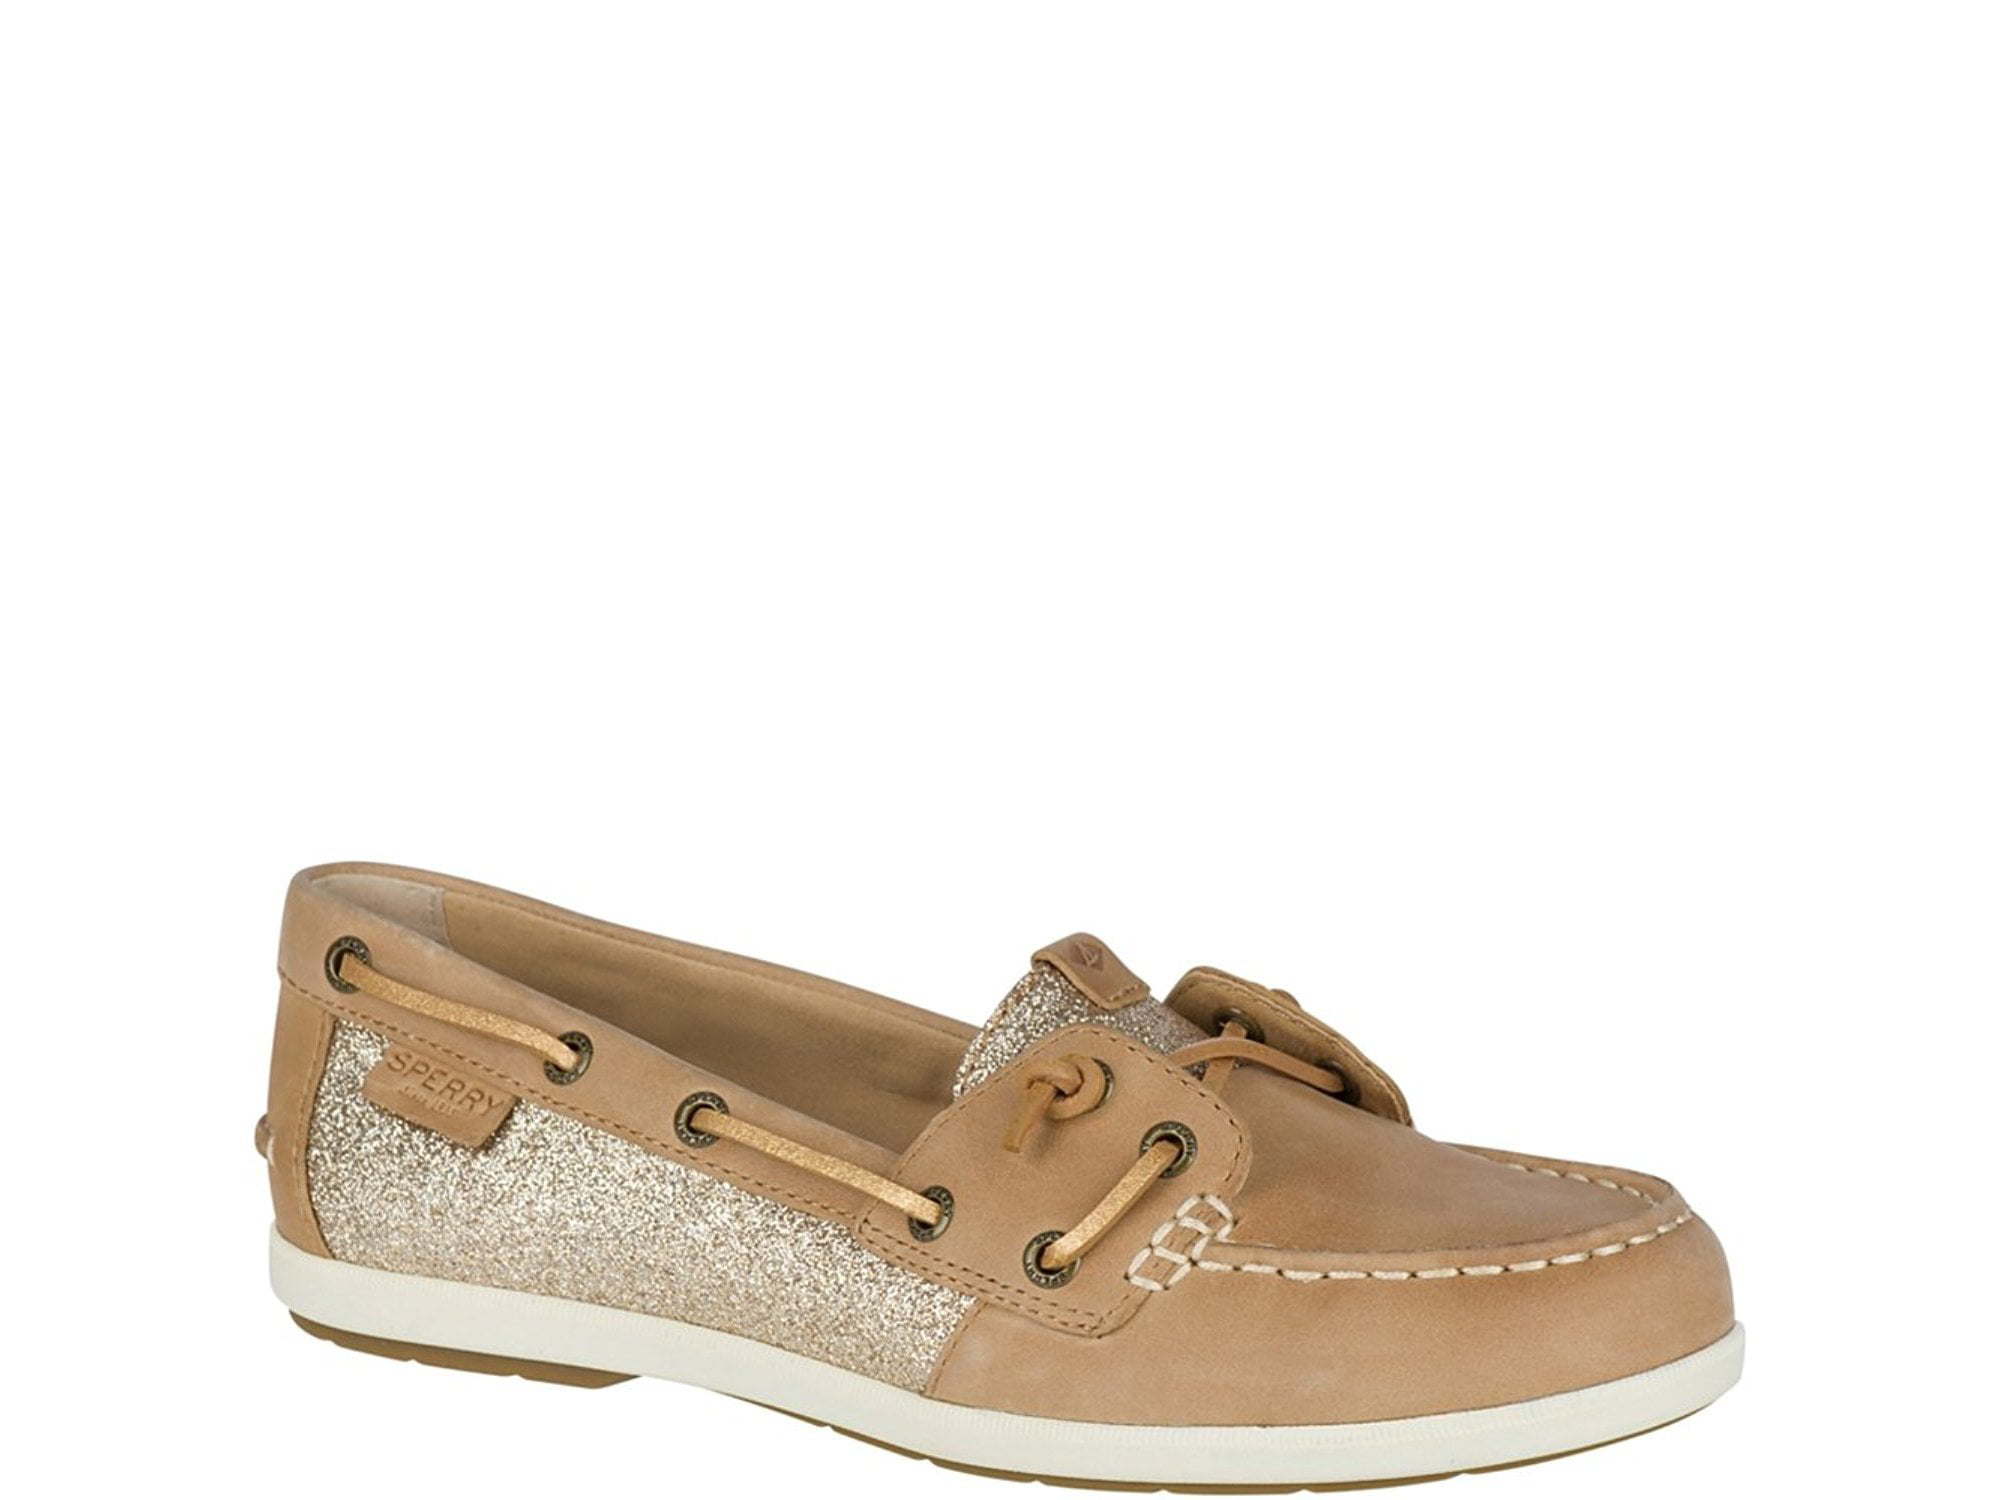 women's boat shoes with arch support